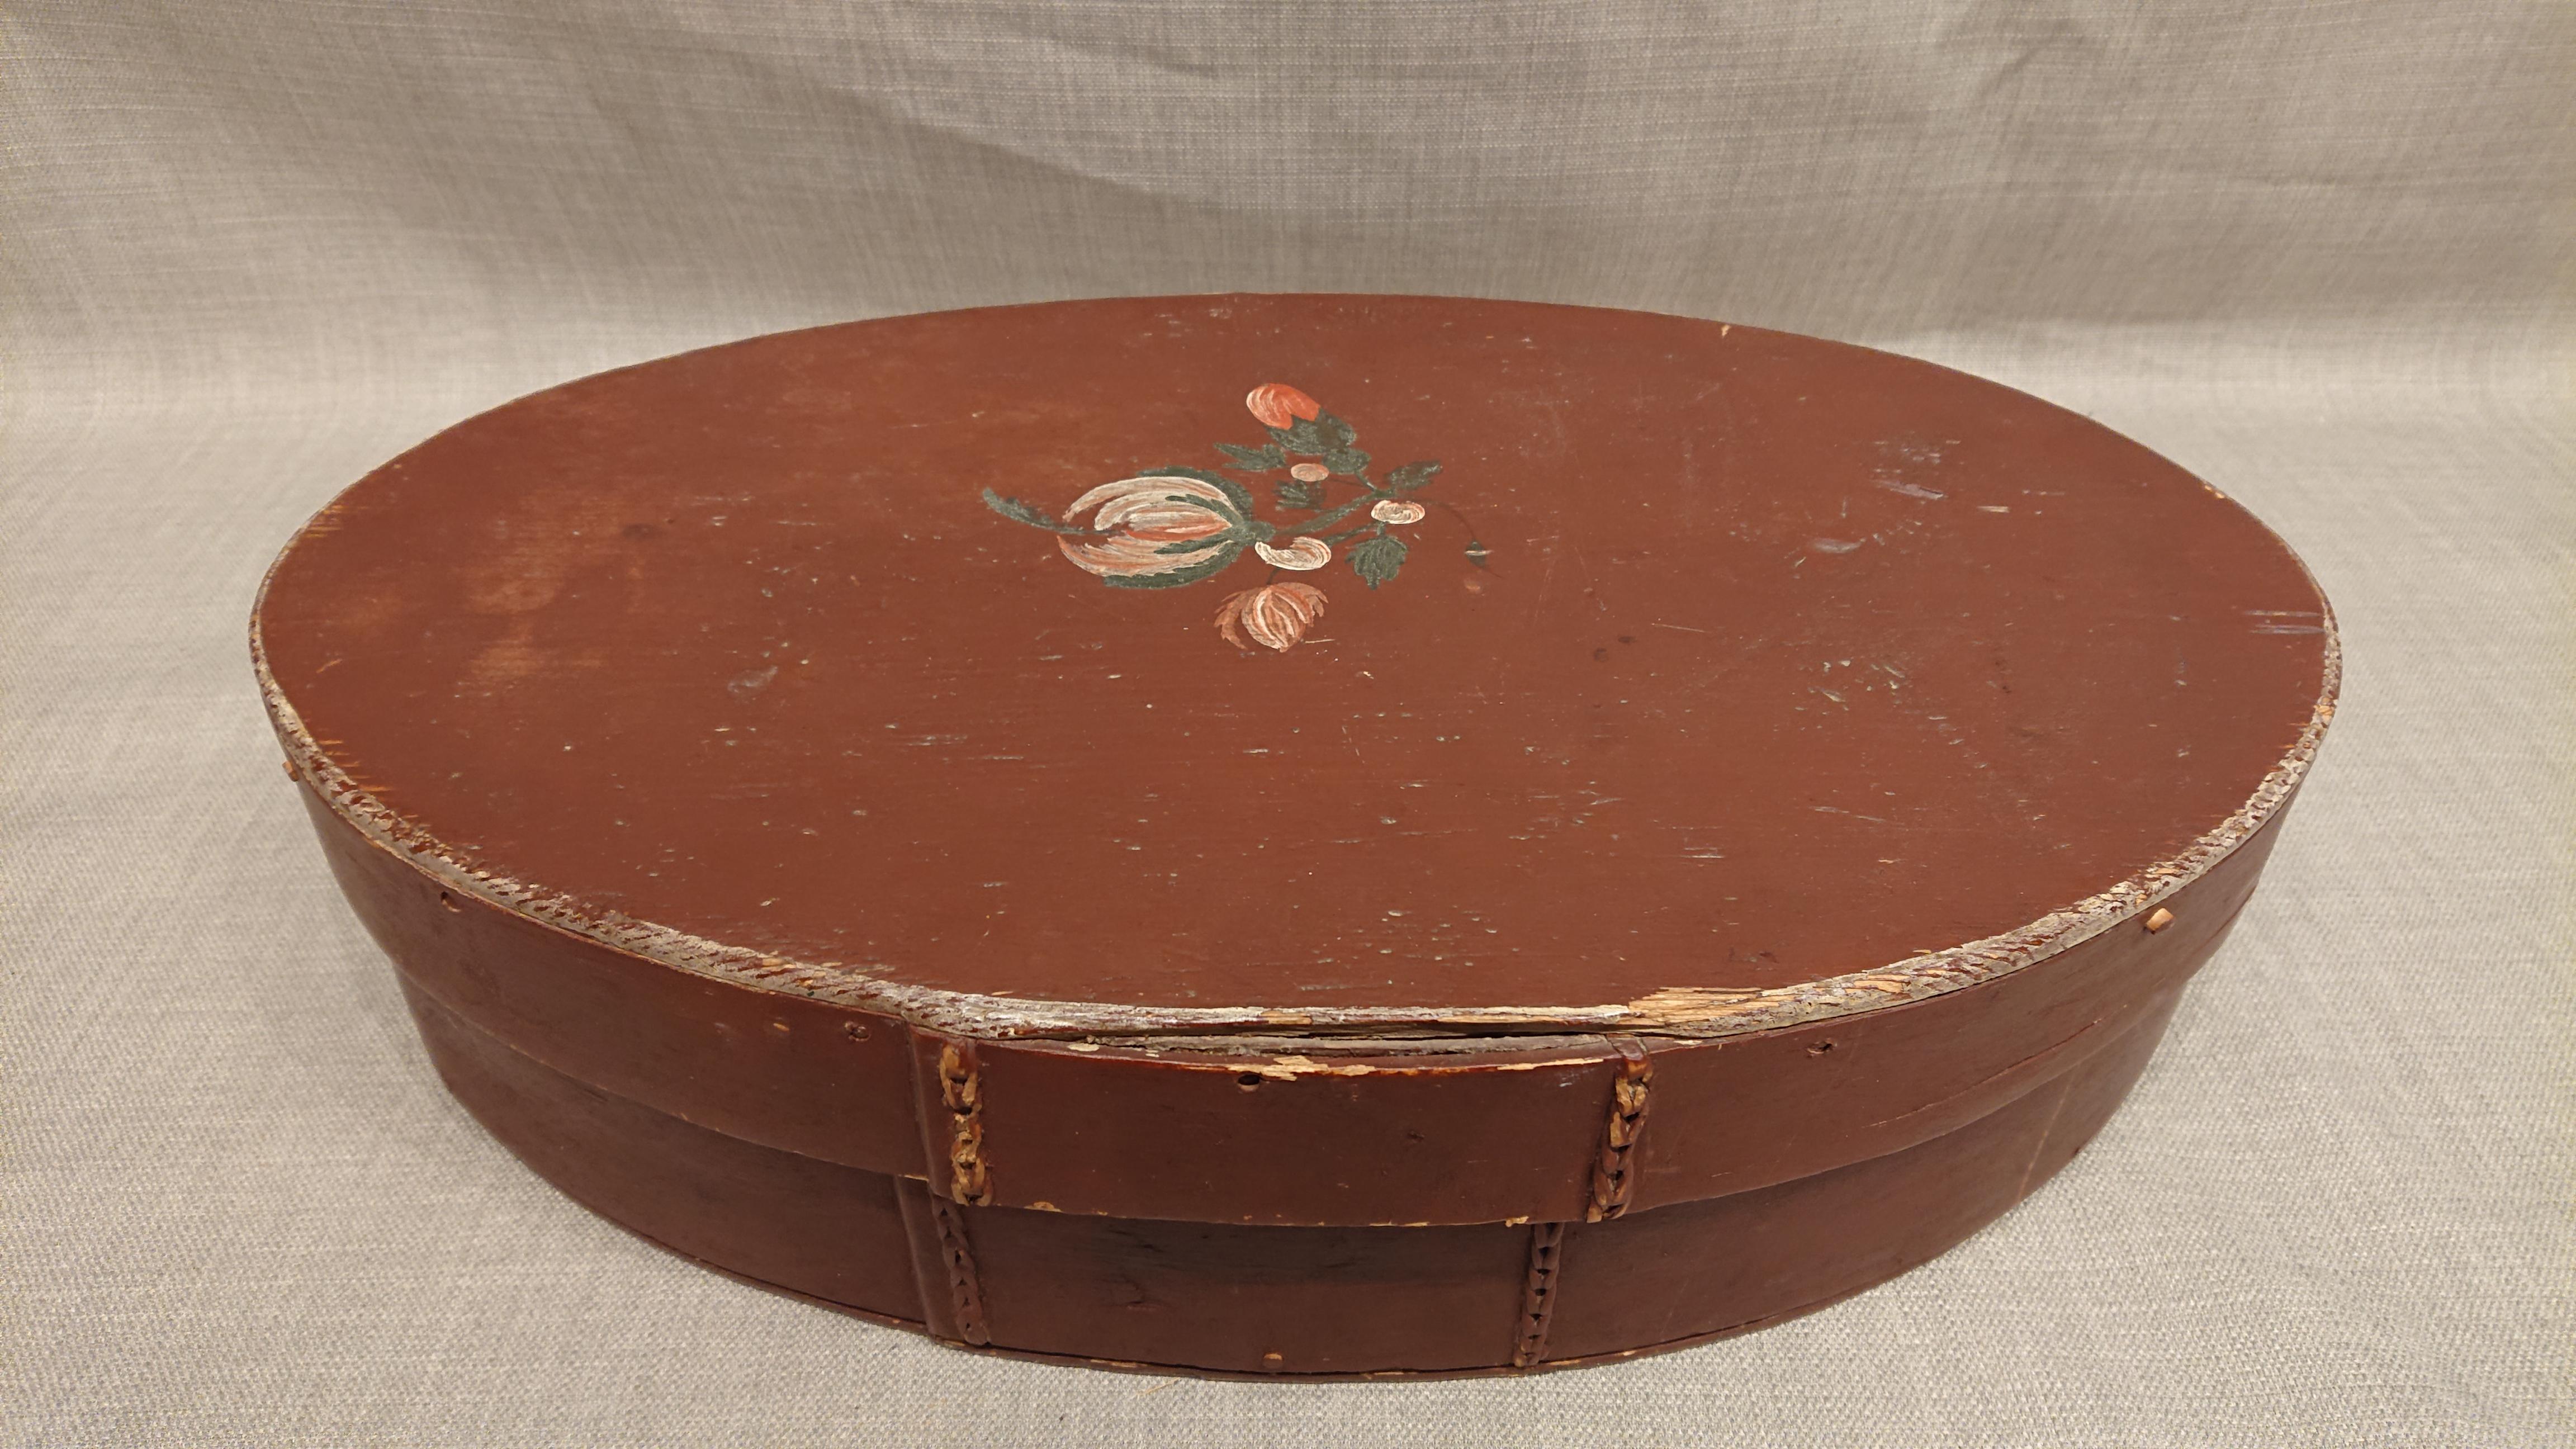 18th Century Swedish Folk Art bentwood box from Harnesand Angermanland, Northern Sweden.
A fantastic Swedish Folk Art Bentvwood Box with Original Paint & floral painting.
Dated 1789 & Signed HMLS.
Bentwood boxes were used for storage throughout